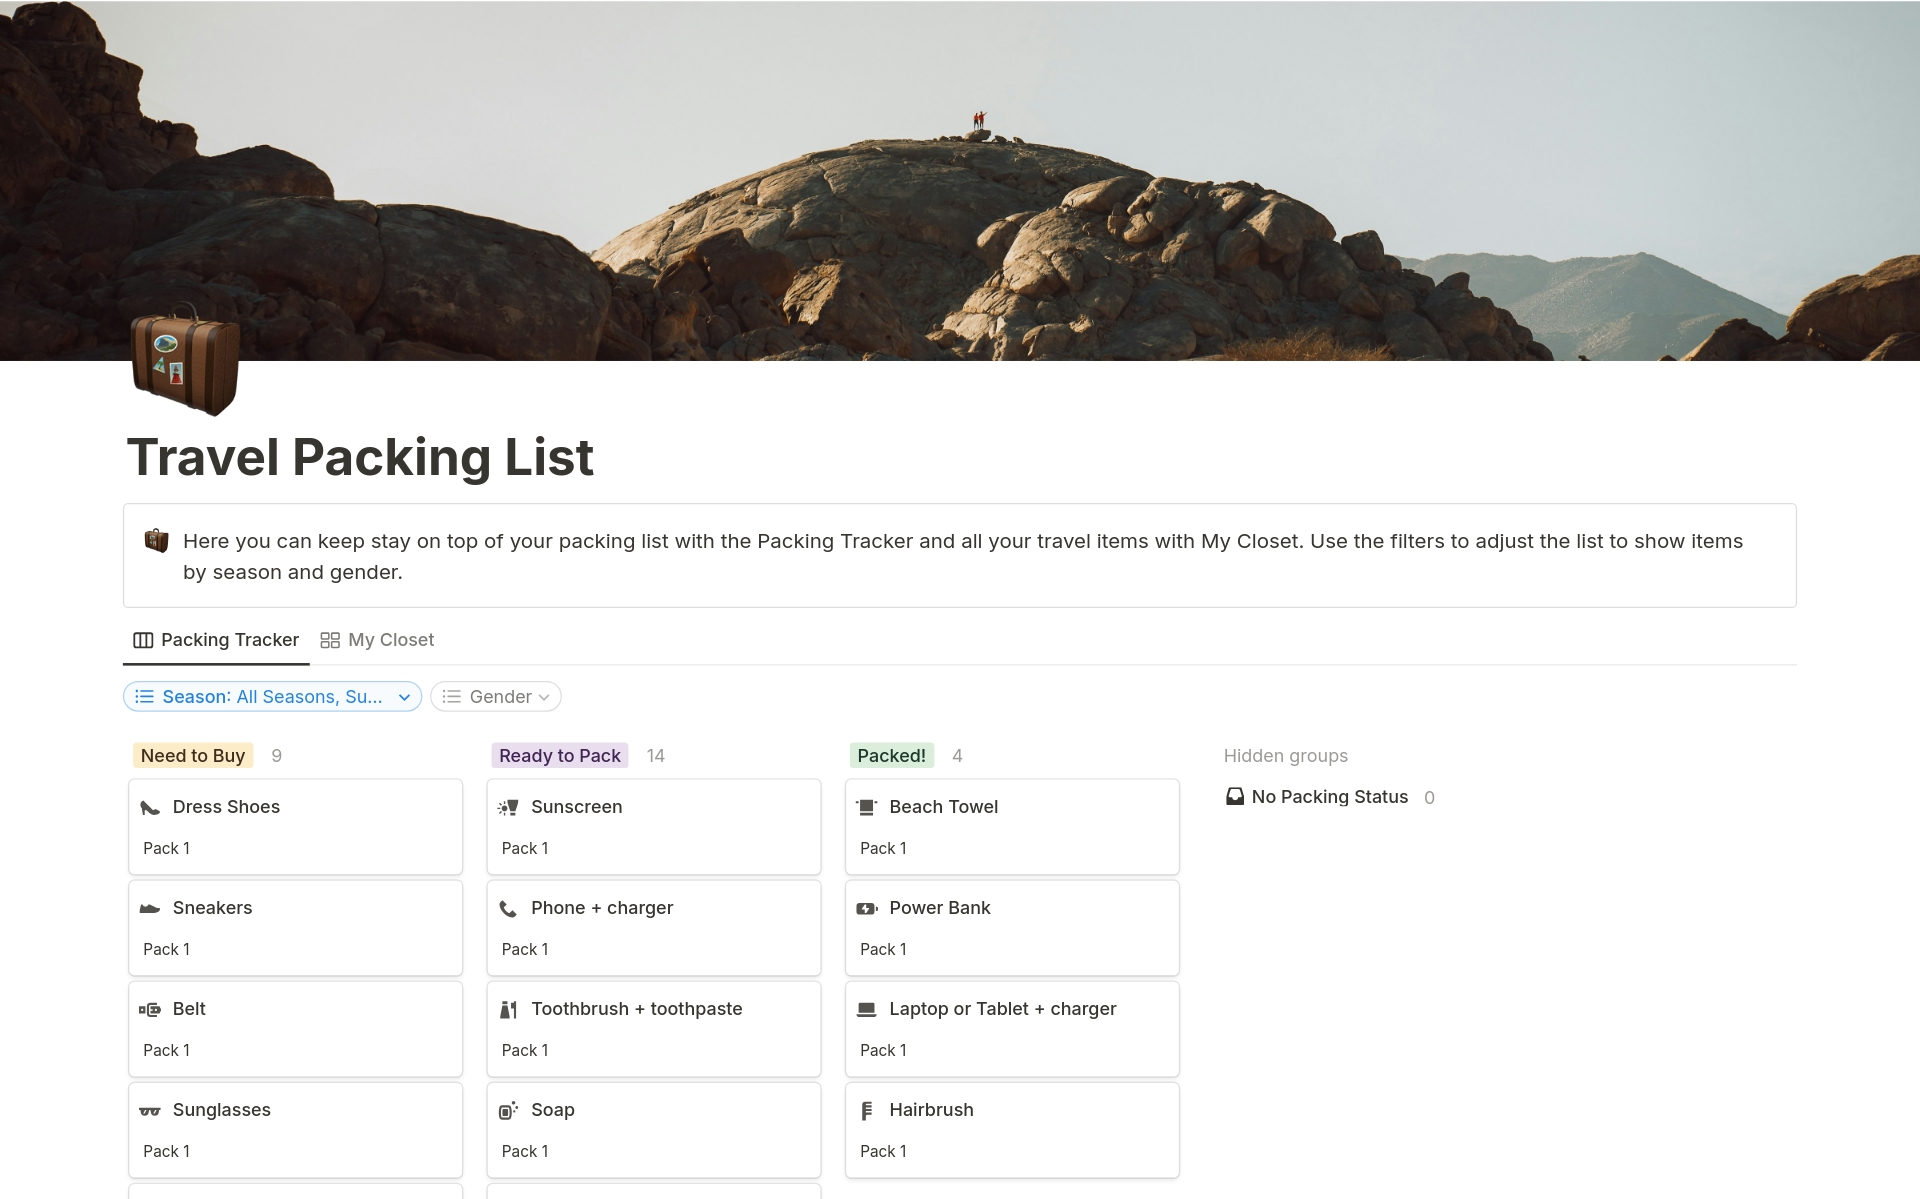 This is part of our Ultimate Travel Planner - our epic Travel Packing List! Easily filter or add to our pre-filled list to build the ultimate packing list. 